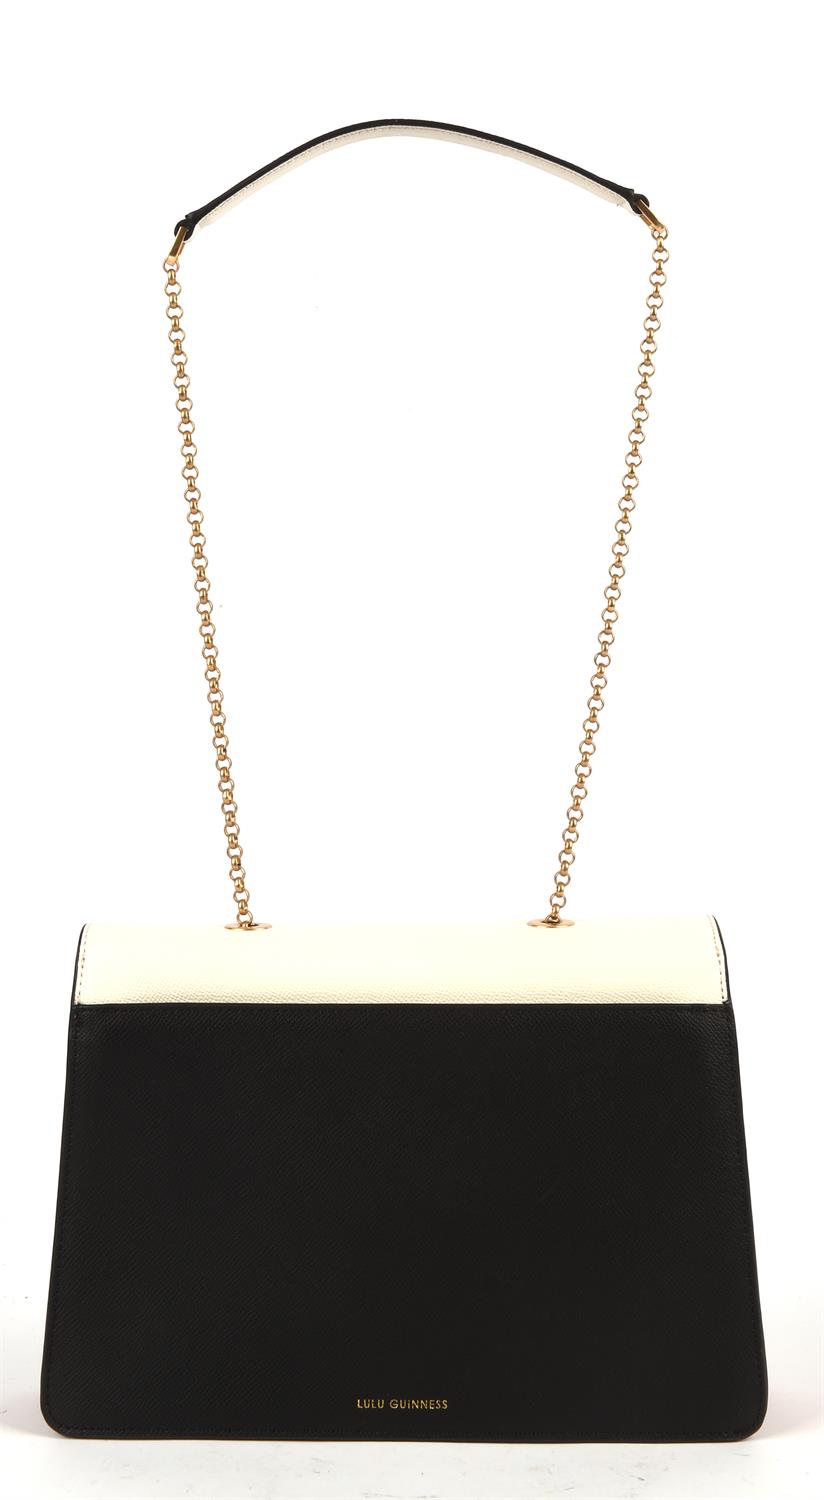 LULU GUINNESS red white and black grained leather handbag with gold chain, (Zara) dust bag and - Image 8 of 10